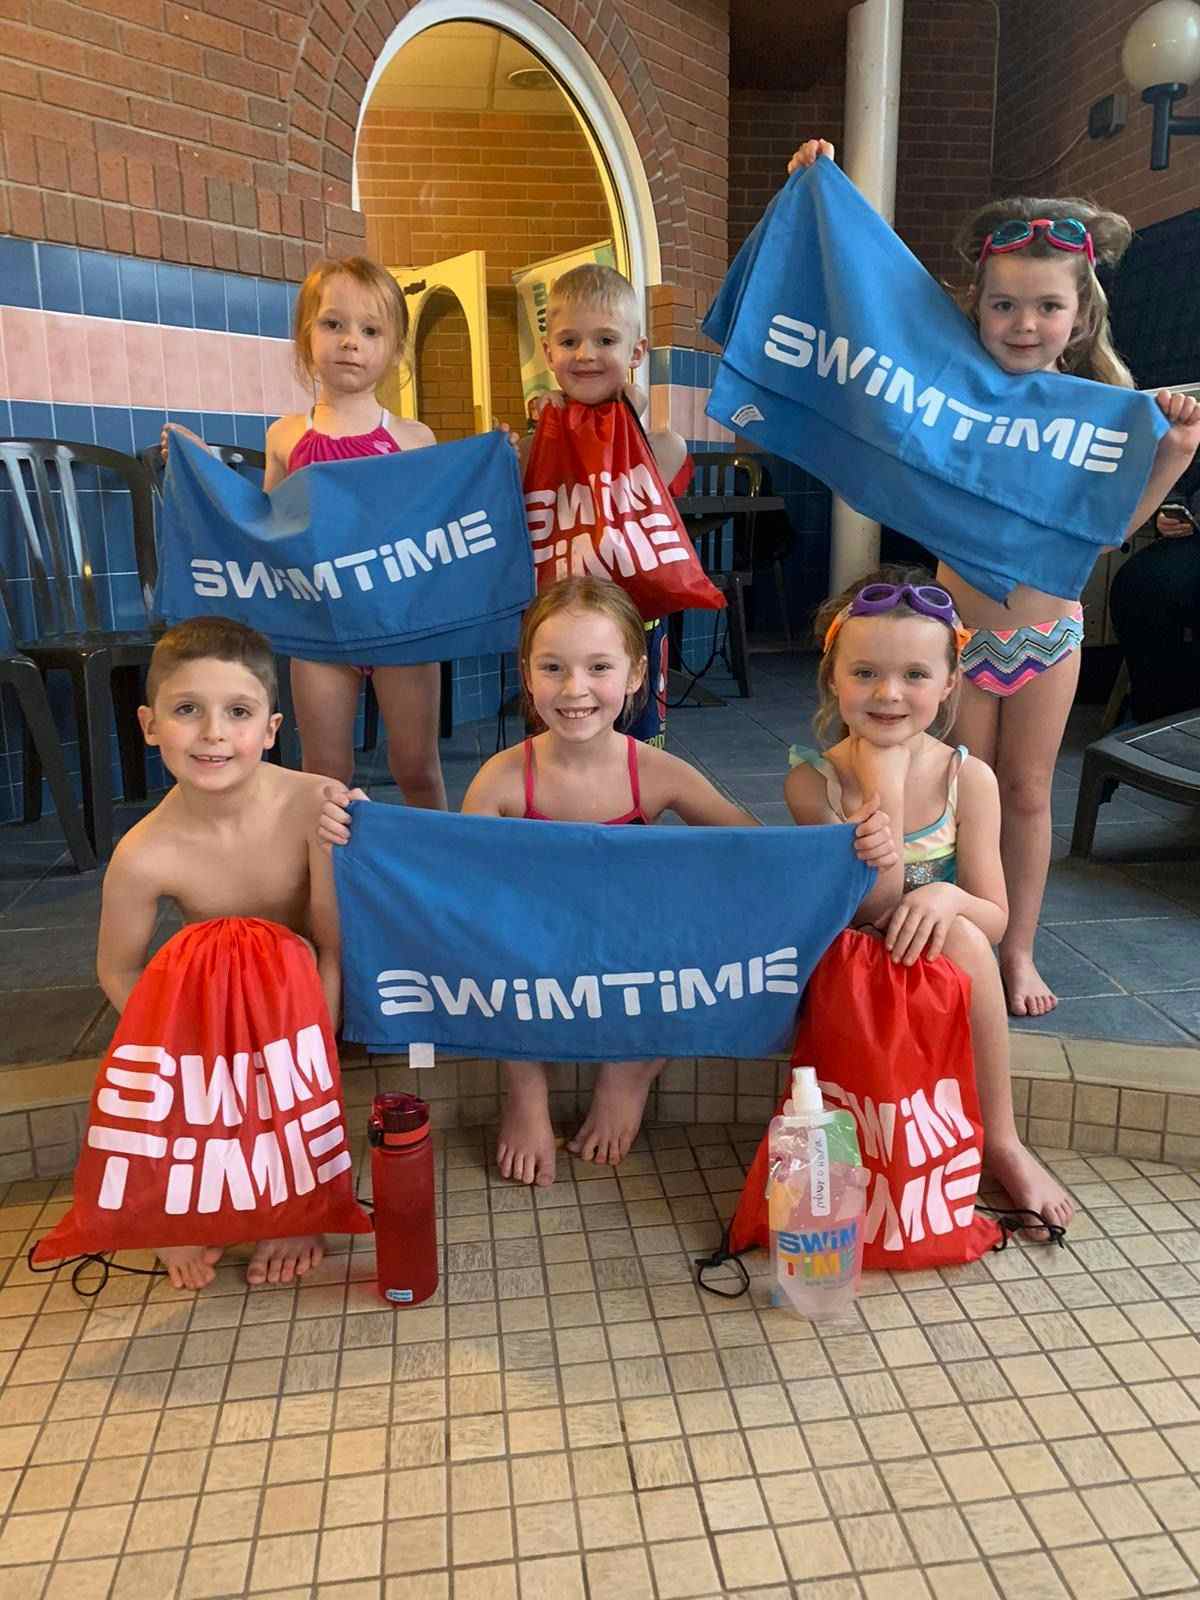 Children holding bags and towels with Swimtime logo